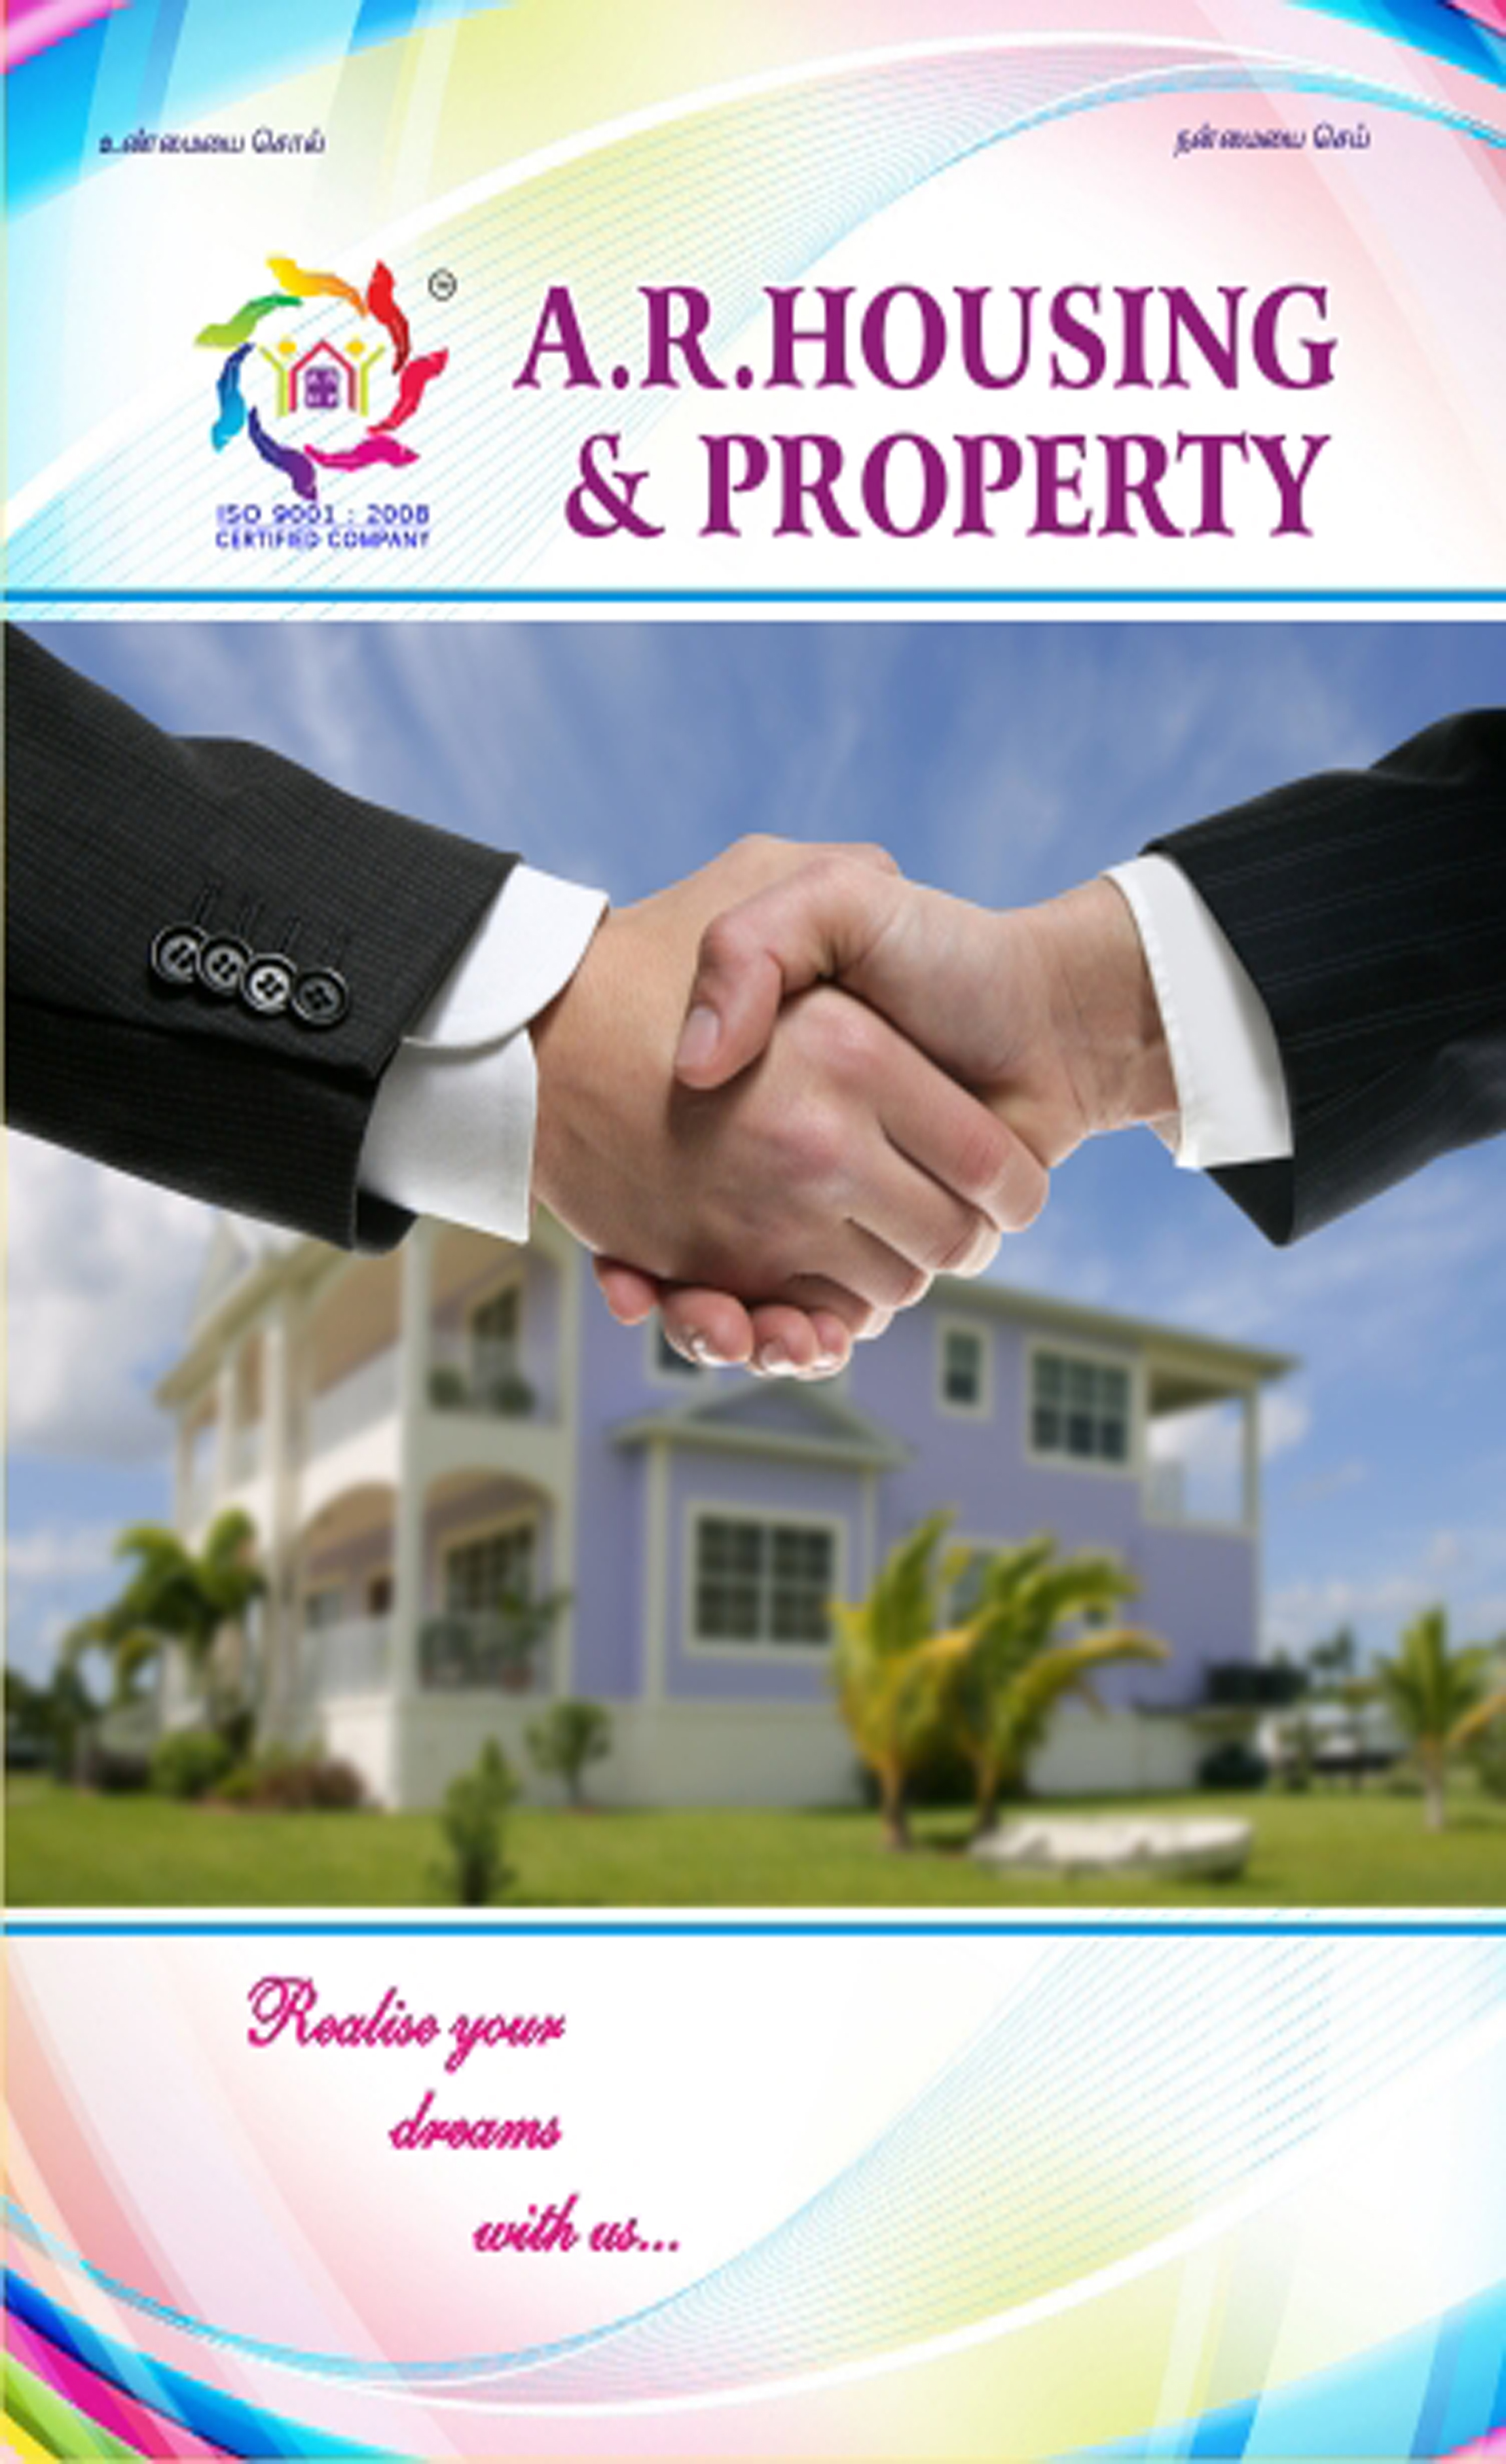  A.R Housing & Properties:Services